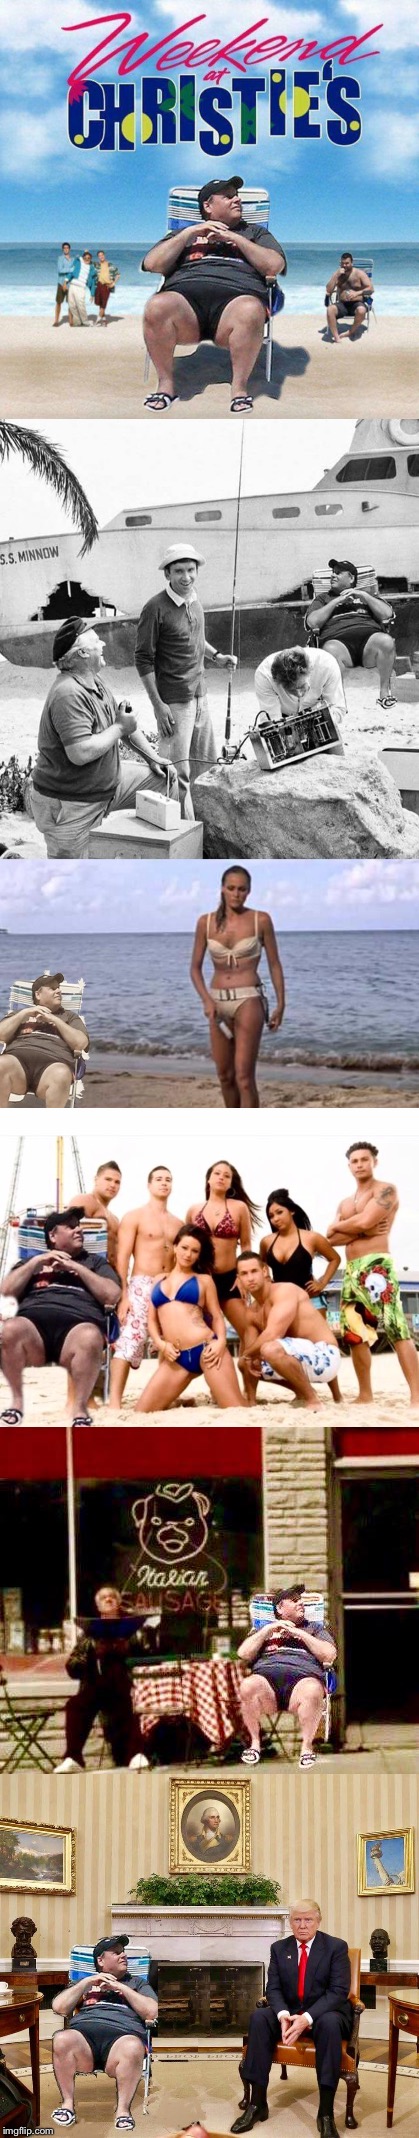 Beachgate | . | image tagged in chris christie,gilligan's island,007,sopranos,jersey shore,weekend at bernie's | made w/ Imgflip meme maker